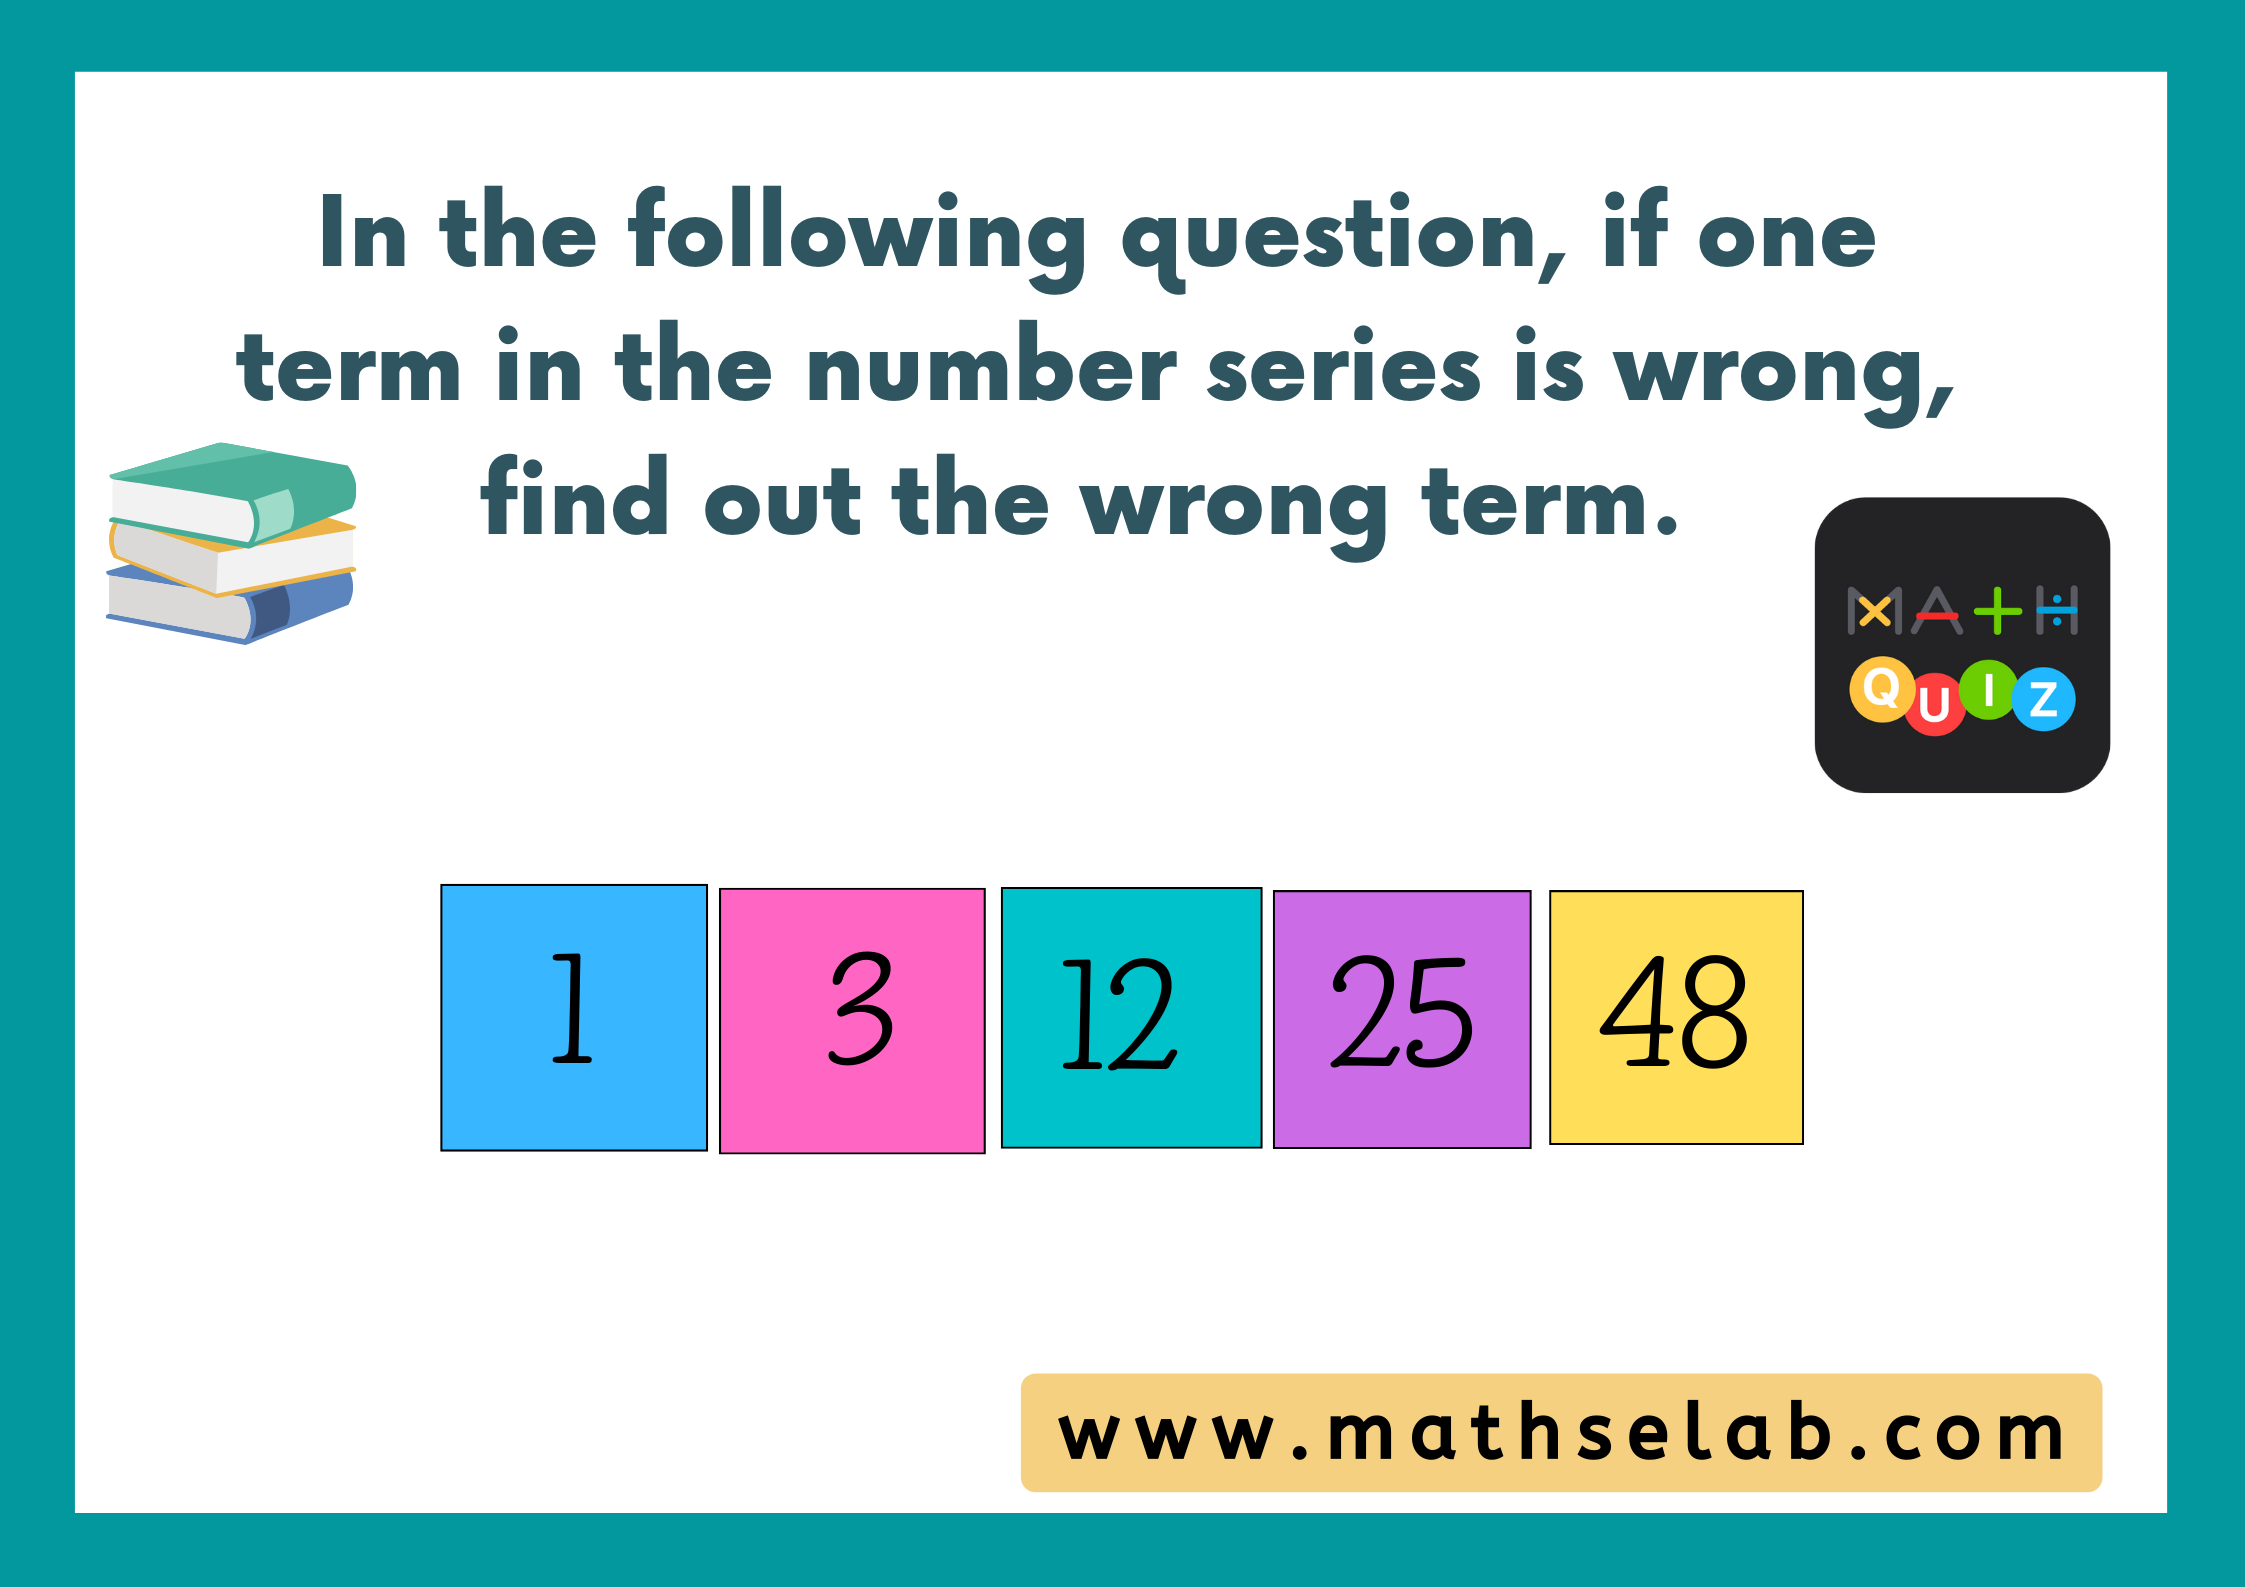 In the following question, if one term in the number series is wrong, find out the wrong term. 1, 3, 12, 25, 48